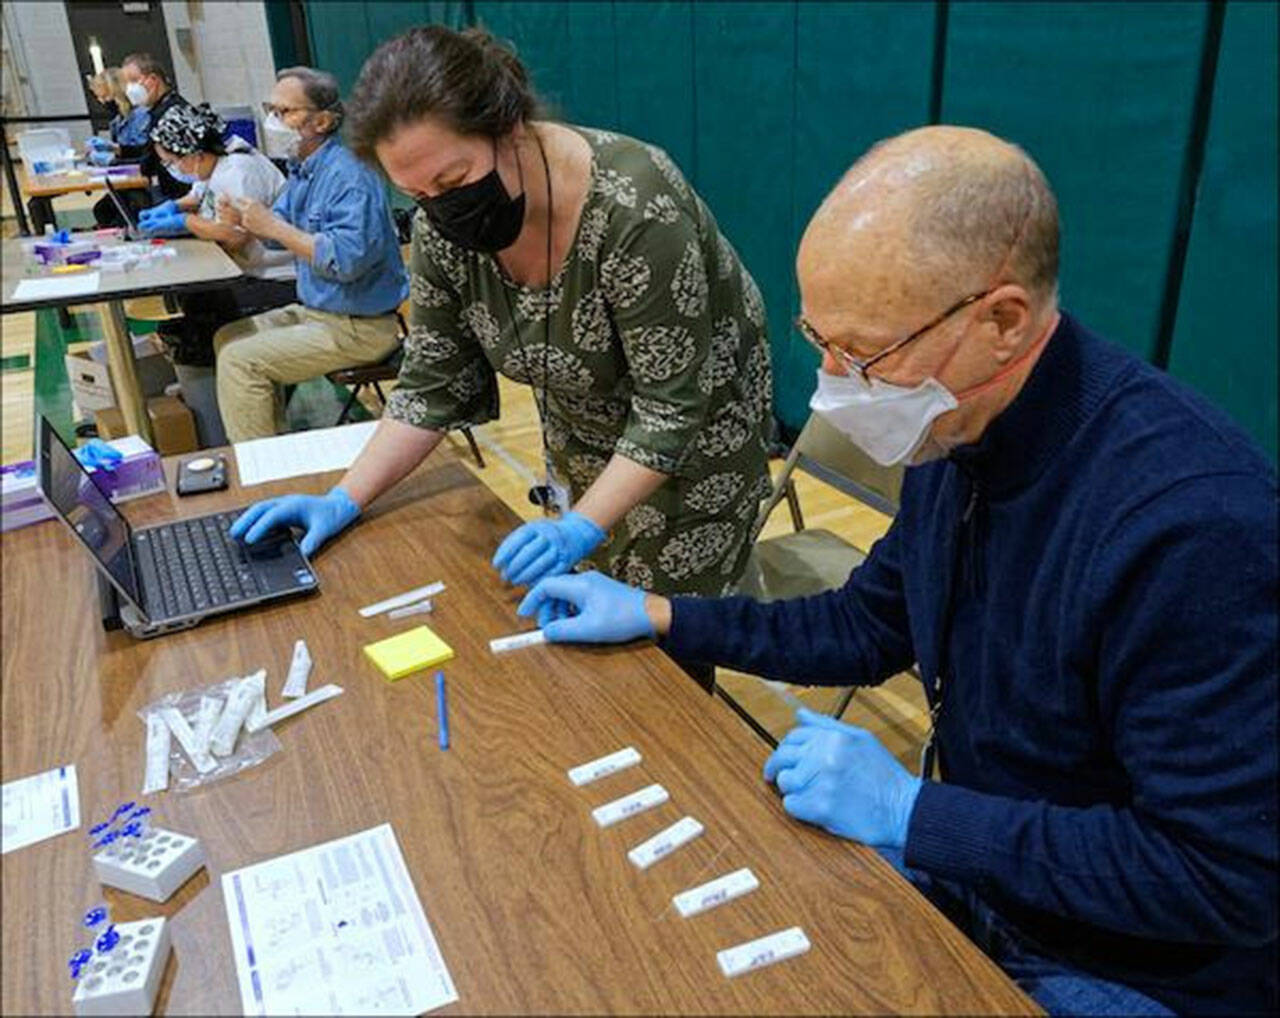 (Rick Wallace Photo) <em>Mass Testing for Dozens:</em> Well over 200 students were tested for COVID last week in two sessions at the high school gym. A team of School District and MRC volunteers pulled it off. In the foreground, MRC volunteer Dr. Chris O’Brian and School District COVID Coordinator Lara McKnight check the antigen test results and enter them into the District’s logging system. In the background at other testing stations: MRC volunteer Dr. Jim Bristow, School District Coordinator Melissa Aguirre-Lopez, School District Athletic Director Andy Sears, and School District Human Resource Director Amy Sassara. An MRC team also was standing by to run PCR tests as needed for high-risk individuals and verification of the rapid test results.